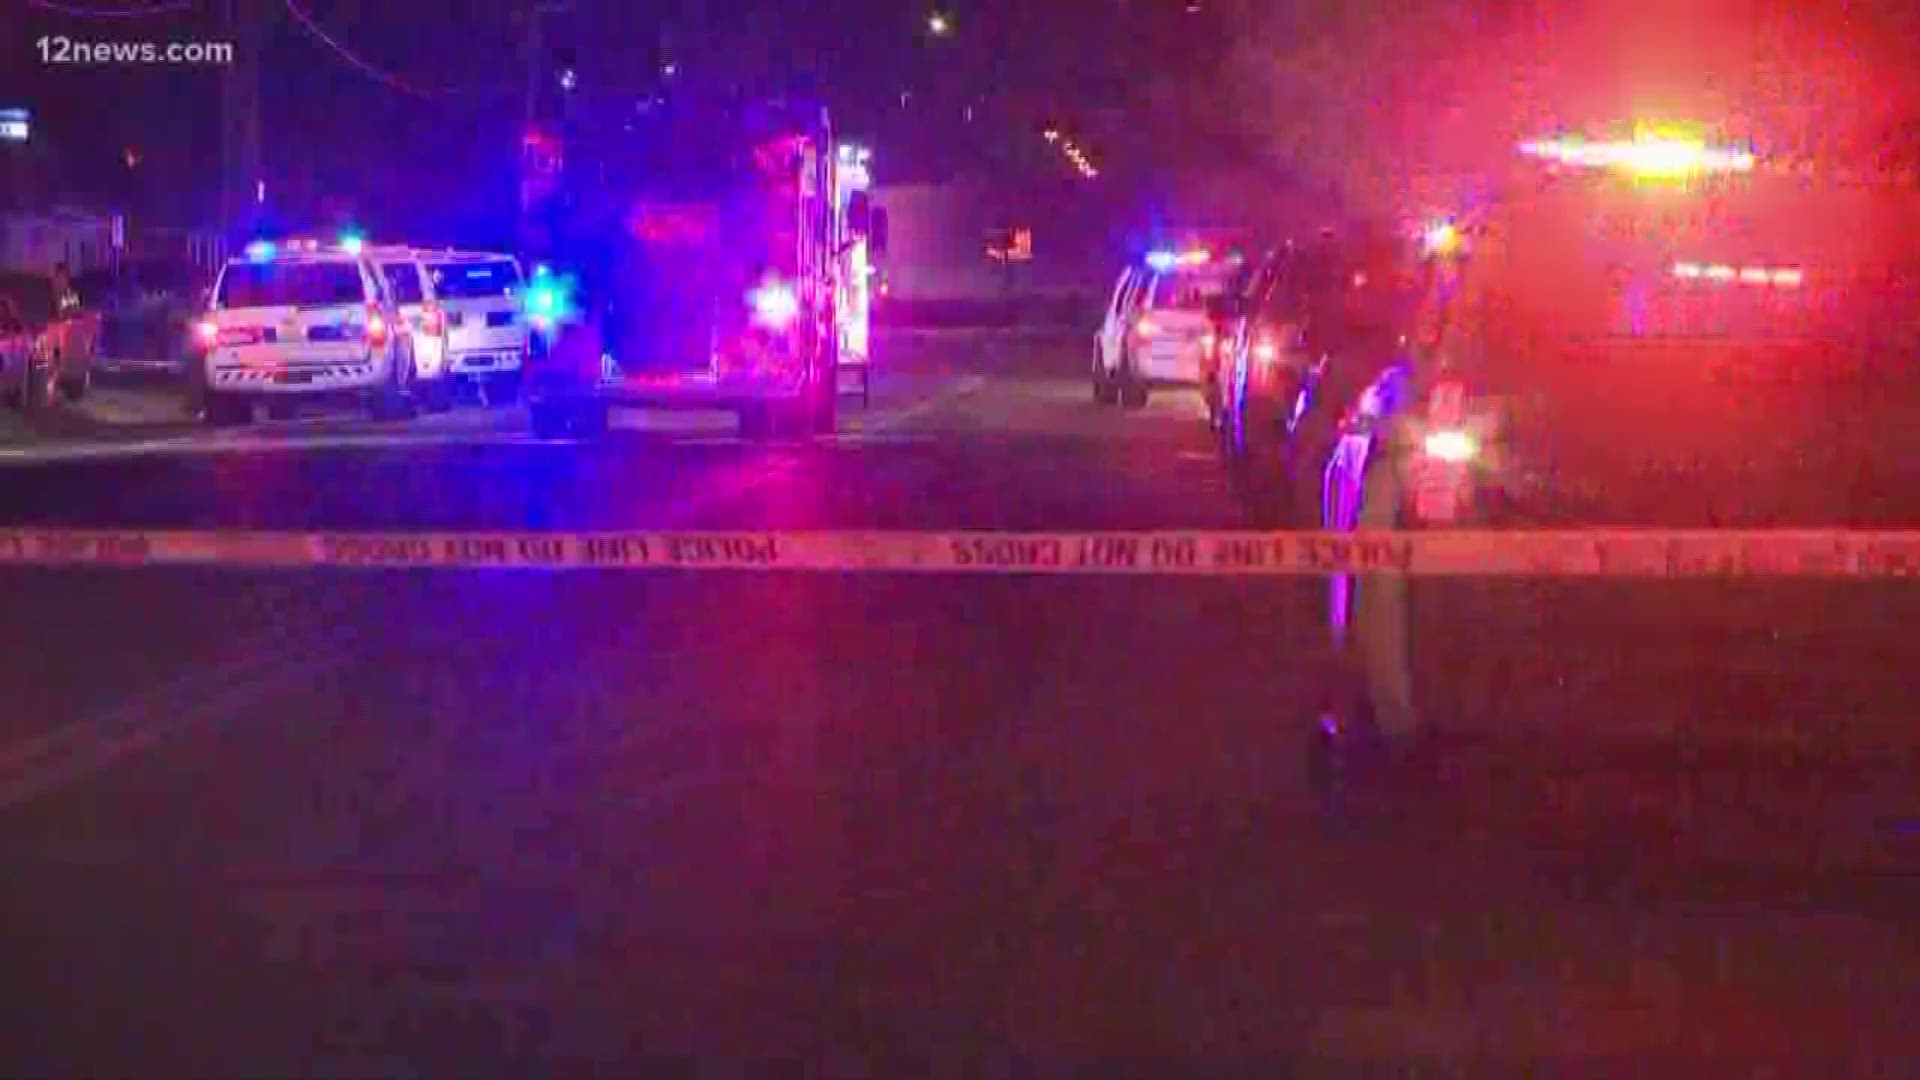 According to officials, Phoenix fire and police were called to the scene early Tuesday morning after reports of multiple gunshot victims.